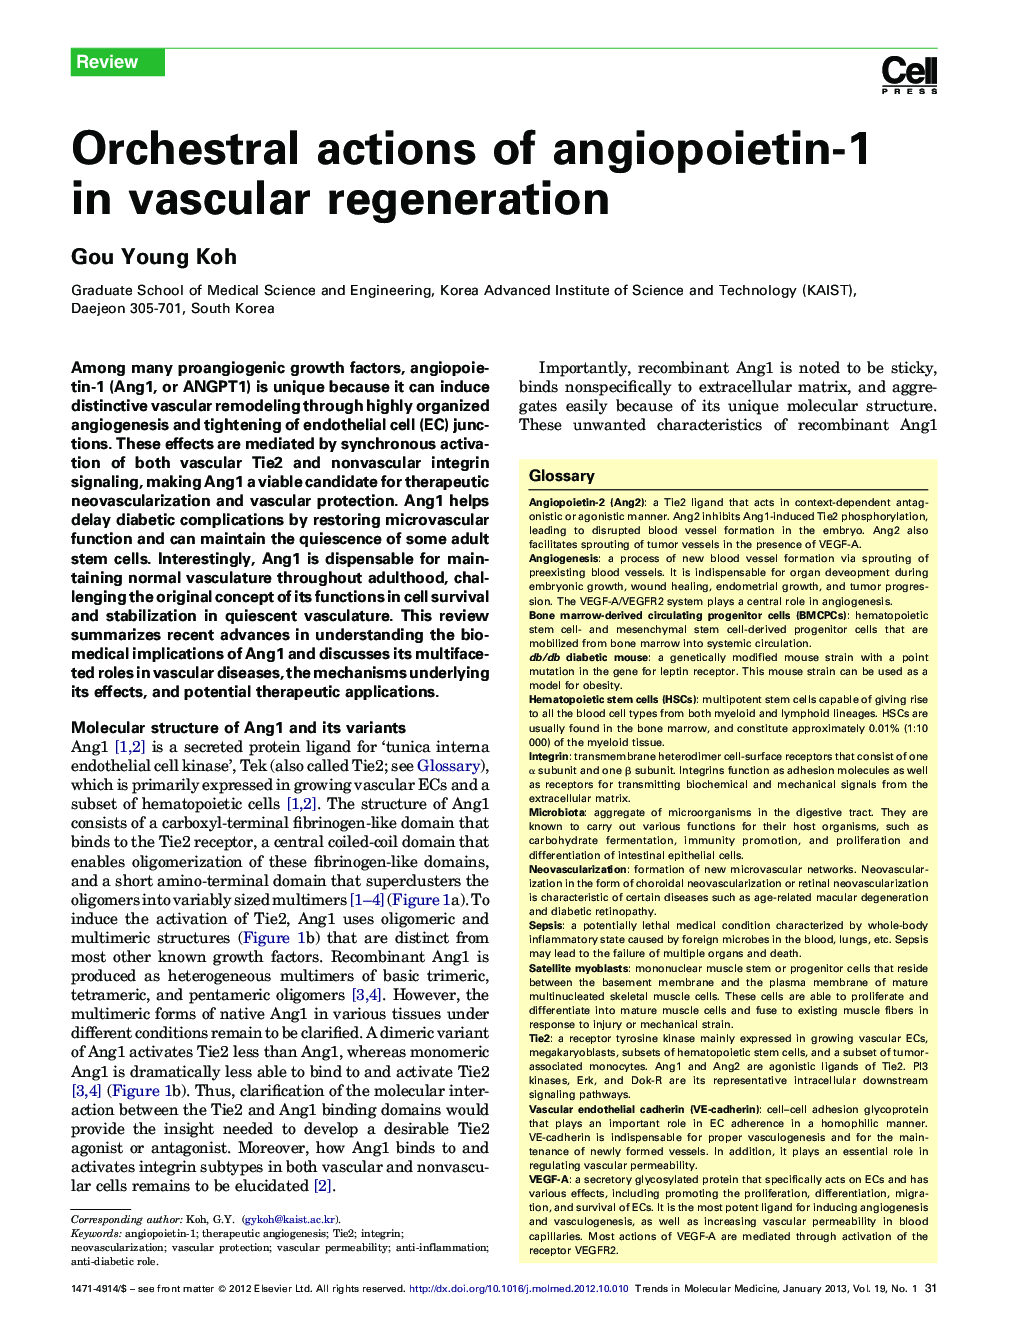 Orchestral actions of angiopoietin-1 in vascular regeneration